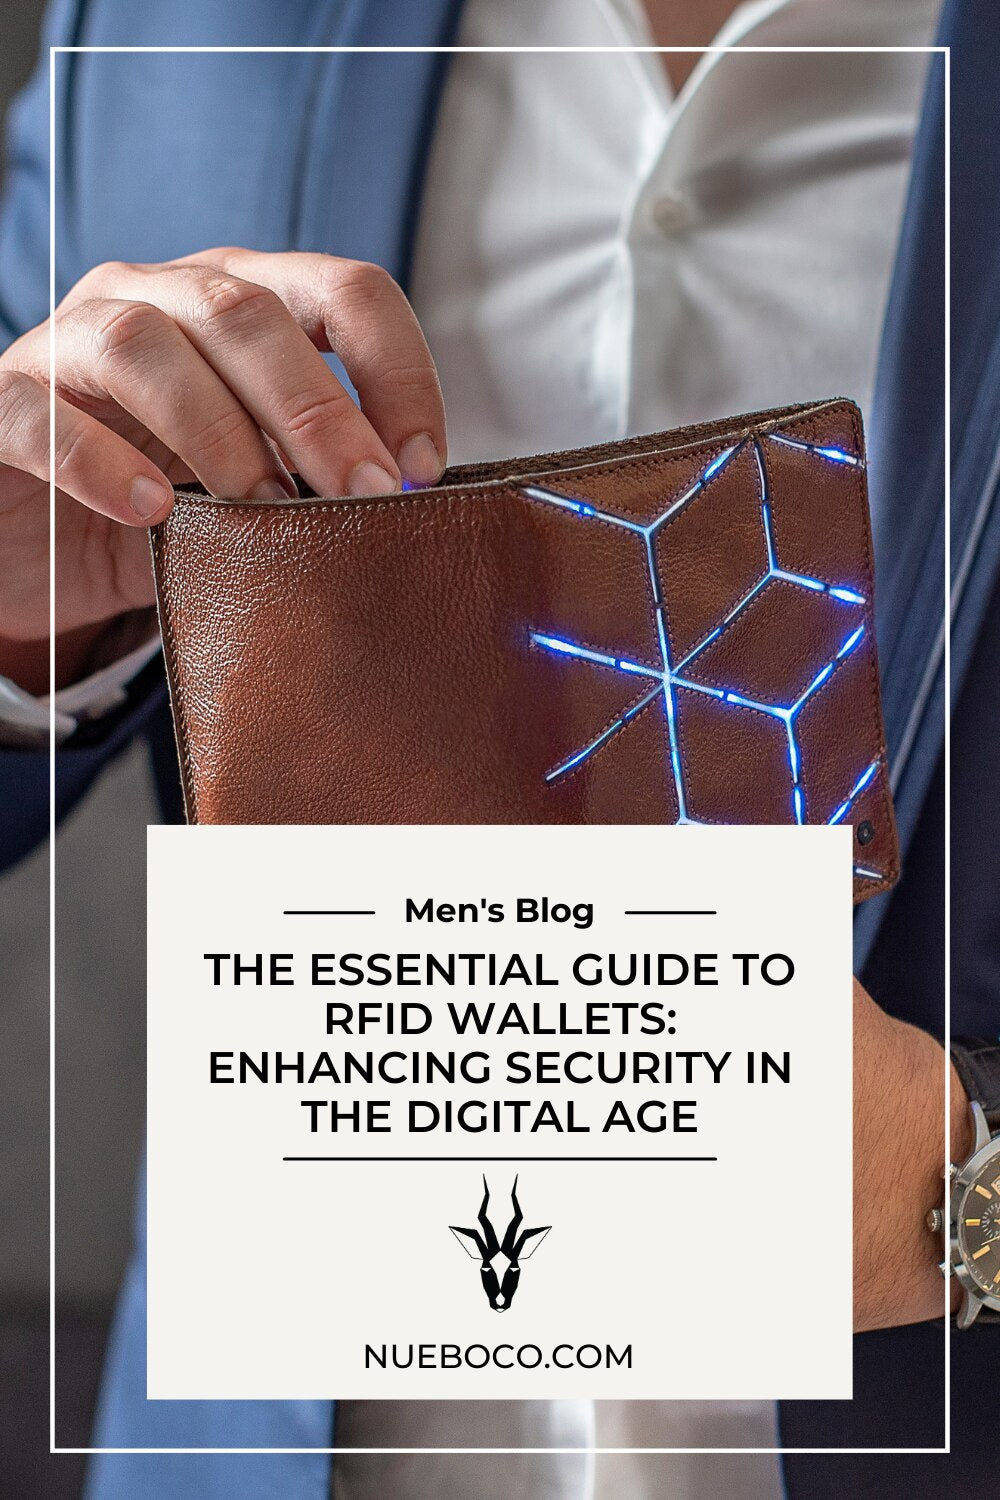 The Essential Guide to RFID Wallets: Enhancing Security in the Digital Age